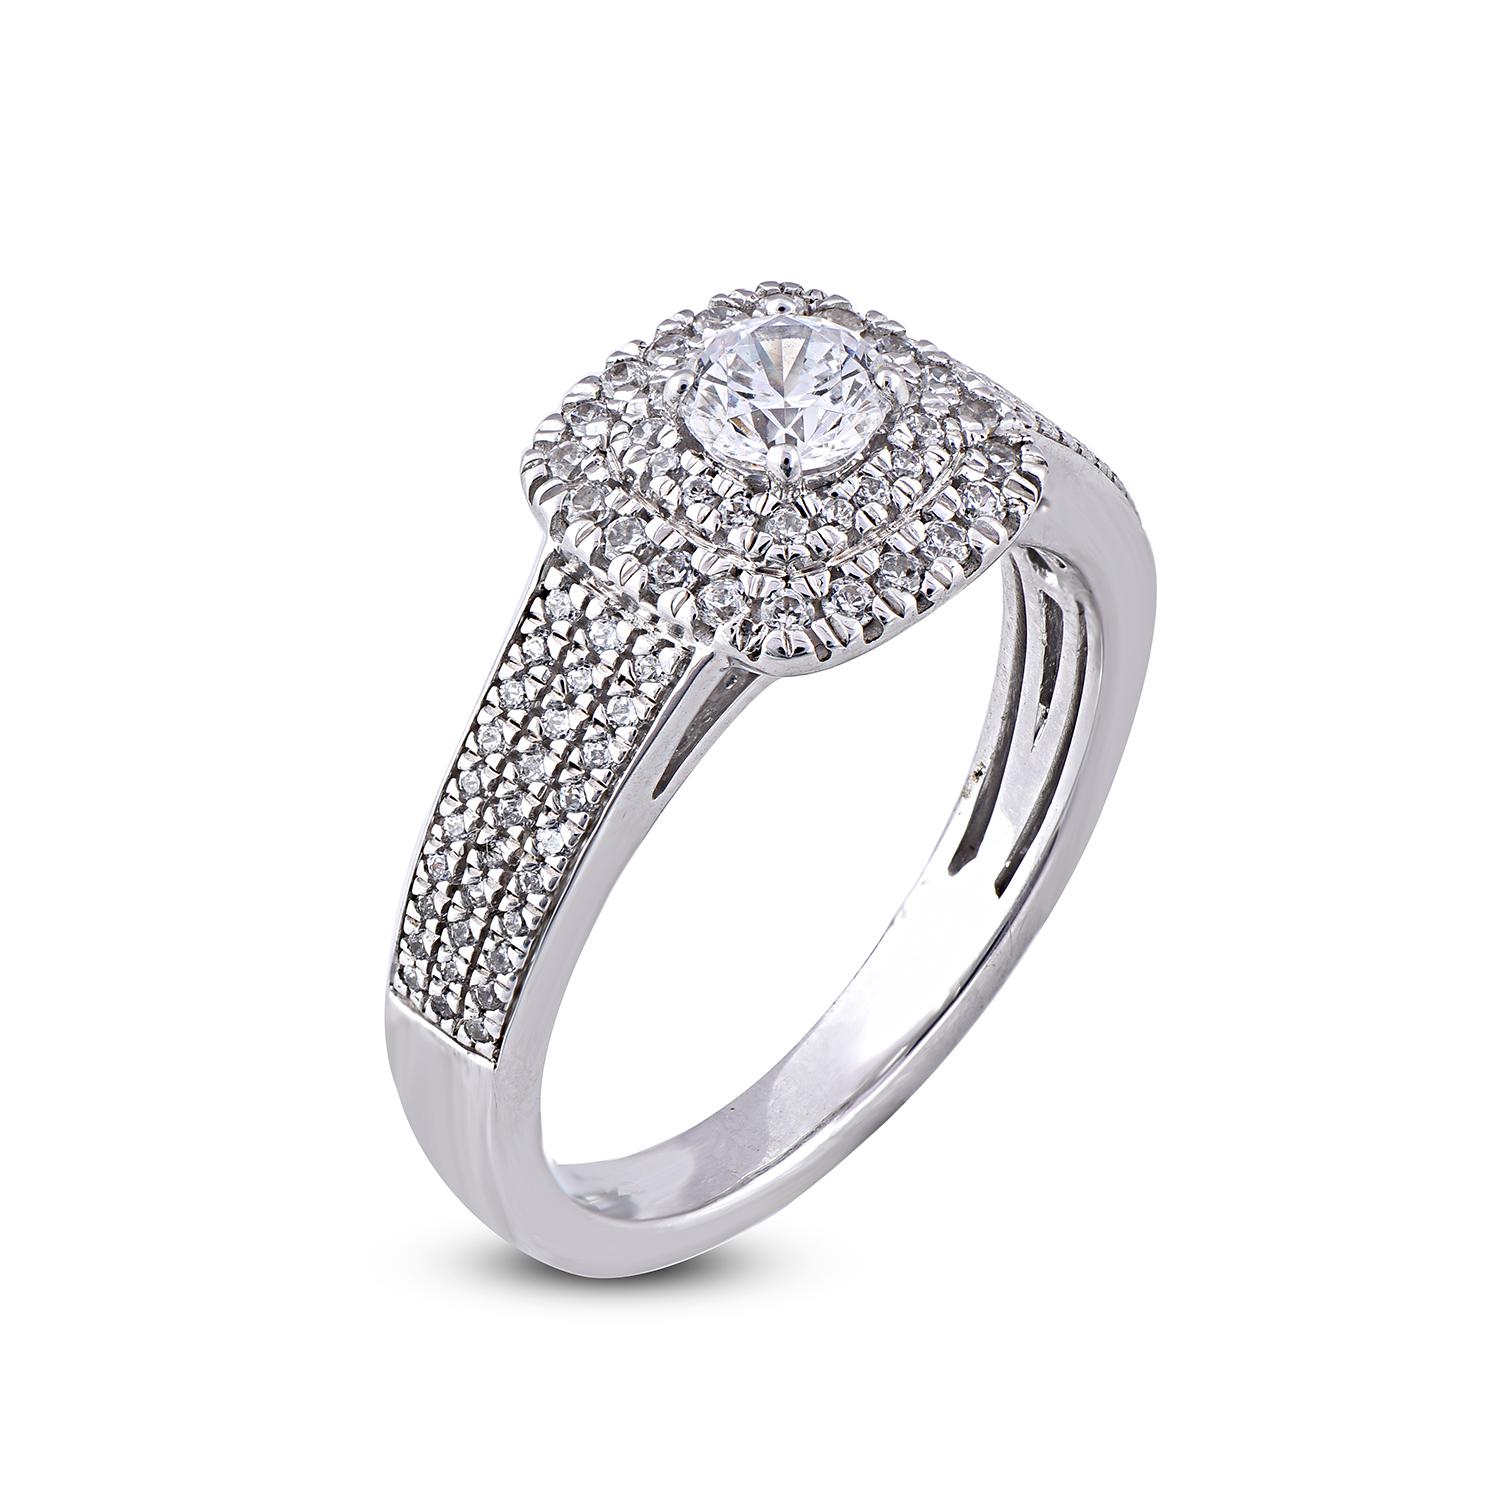 Gorgeous ring that will shine for a lifetime. The ring dazzles with 97 diamonds in prong and pave setting. Crafted in 14 Karat white gold, diamonds are graded H-I Color, I2 Clarity.
